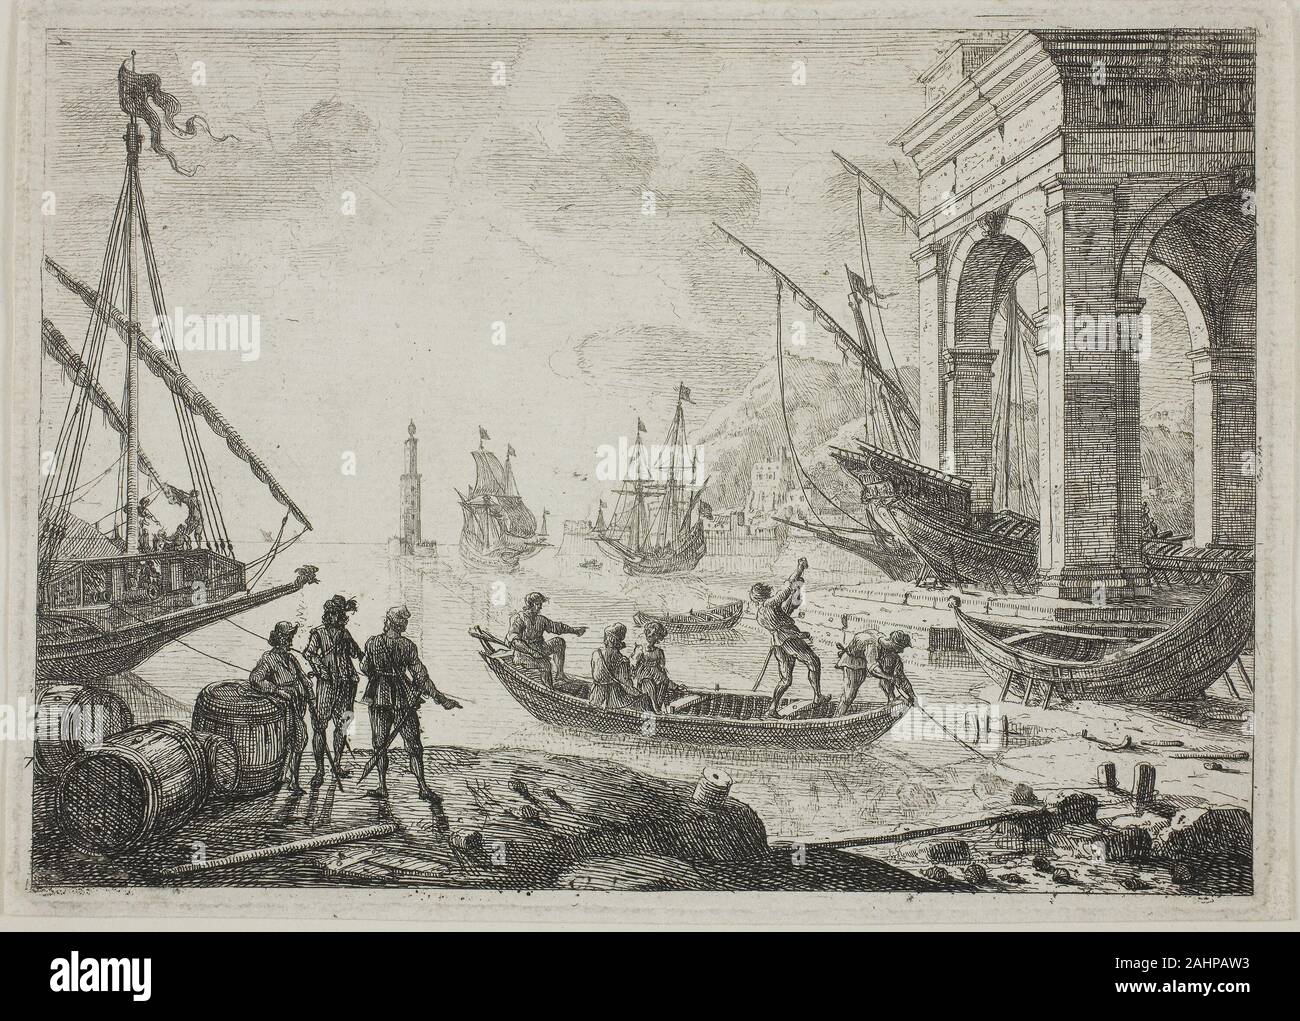 Claude Lorrain. Harbor Scene with a Lighthouse. 1638–1641. France. Etching on ivory laid paper Claude arrived in Rome around 1613 and apprenticed himself to Agostino Tassi, a landscape painter. Except for a brief return to his native Nancy in 1627, he remained in Rome for the rest of his life. Stock Photo